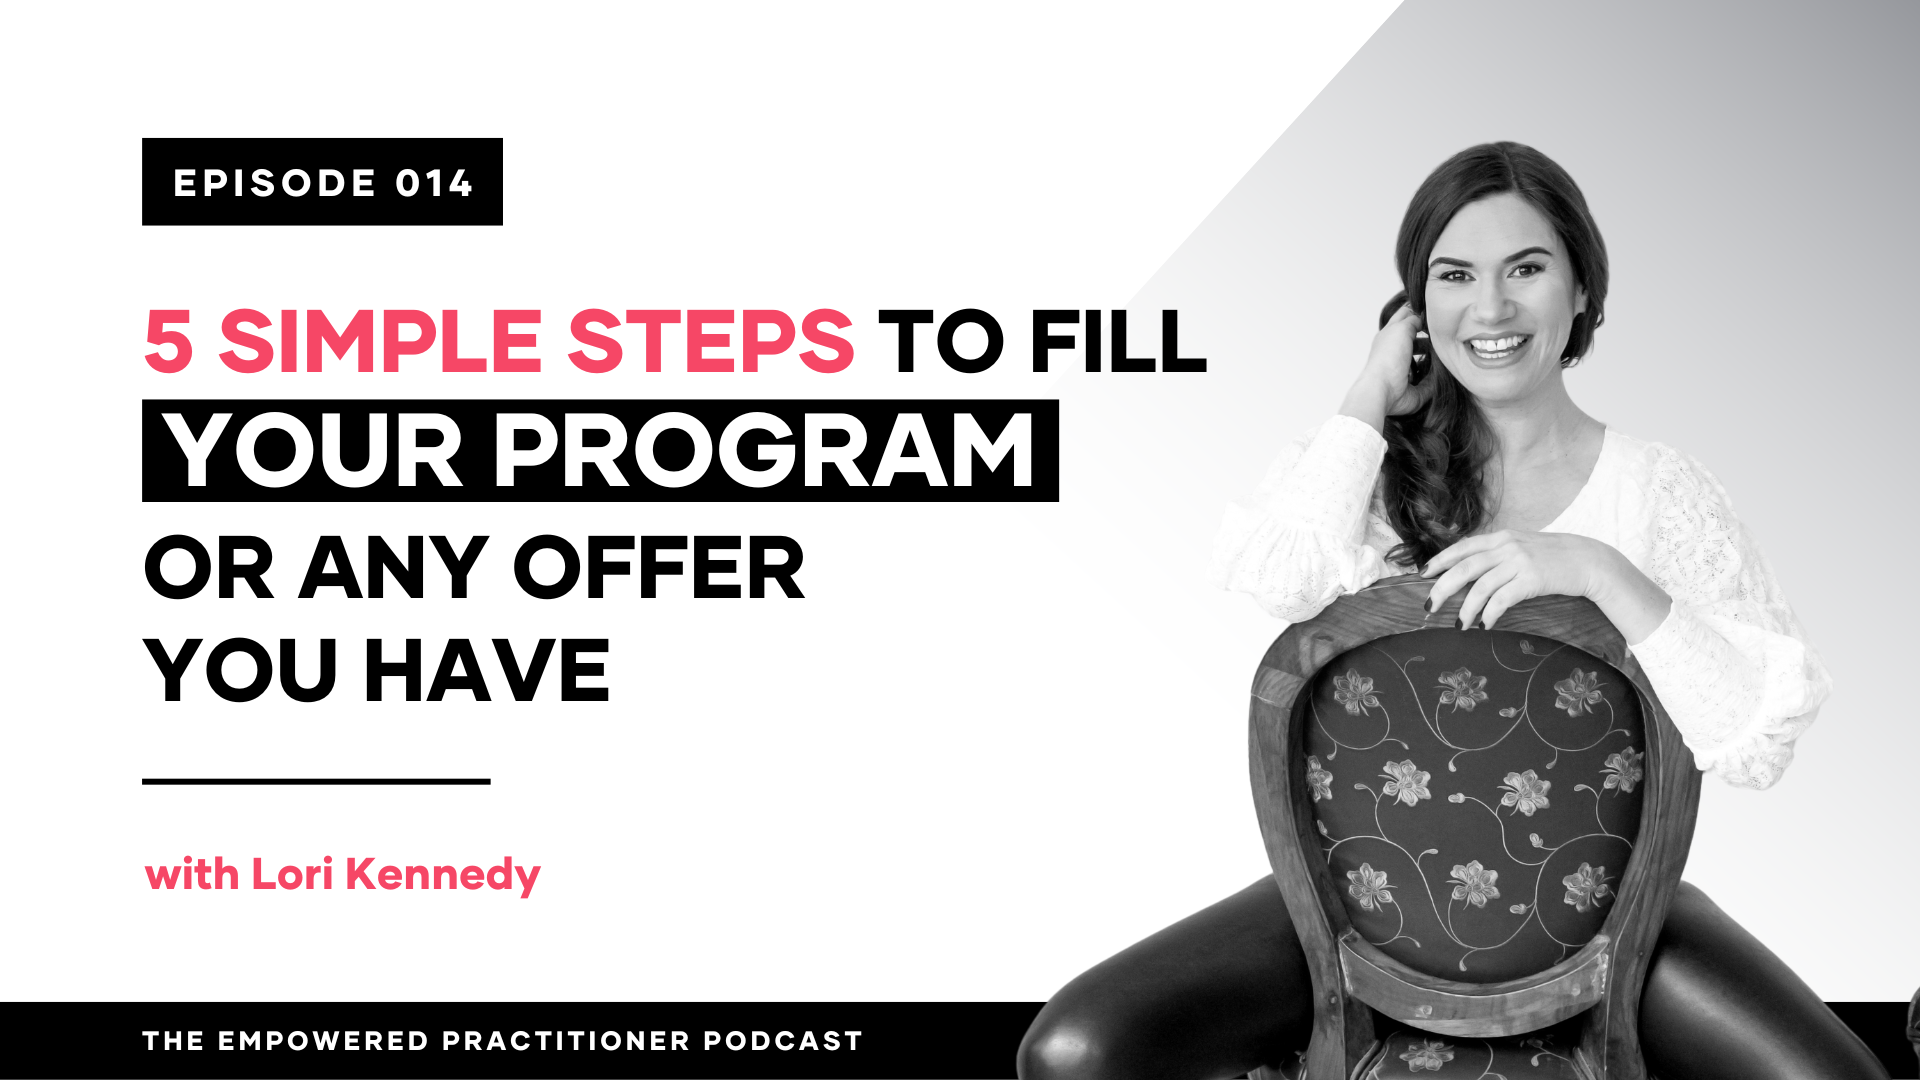 5 simple steps to fill your program or any offer you have